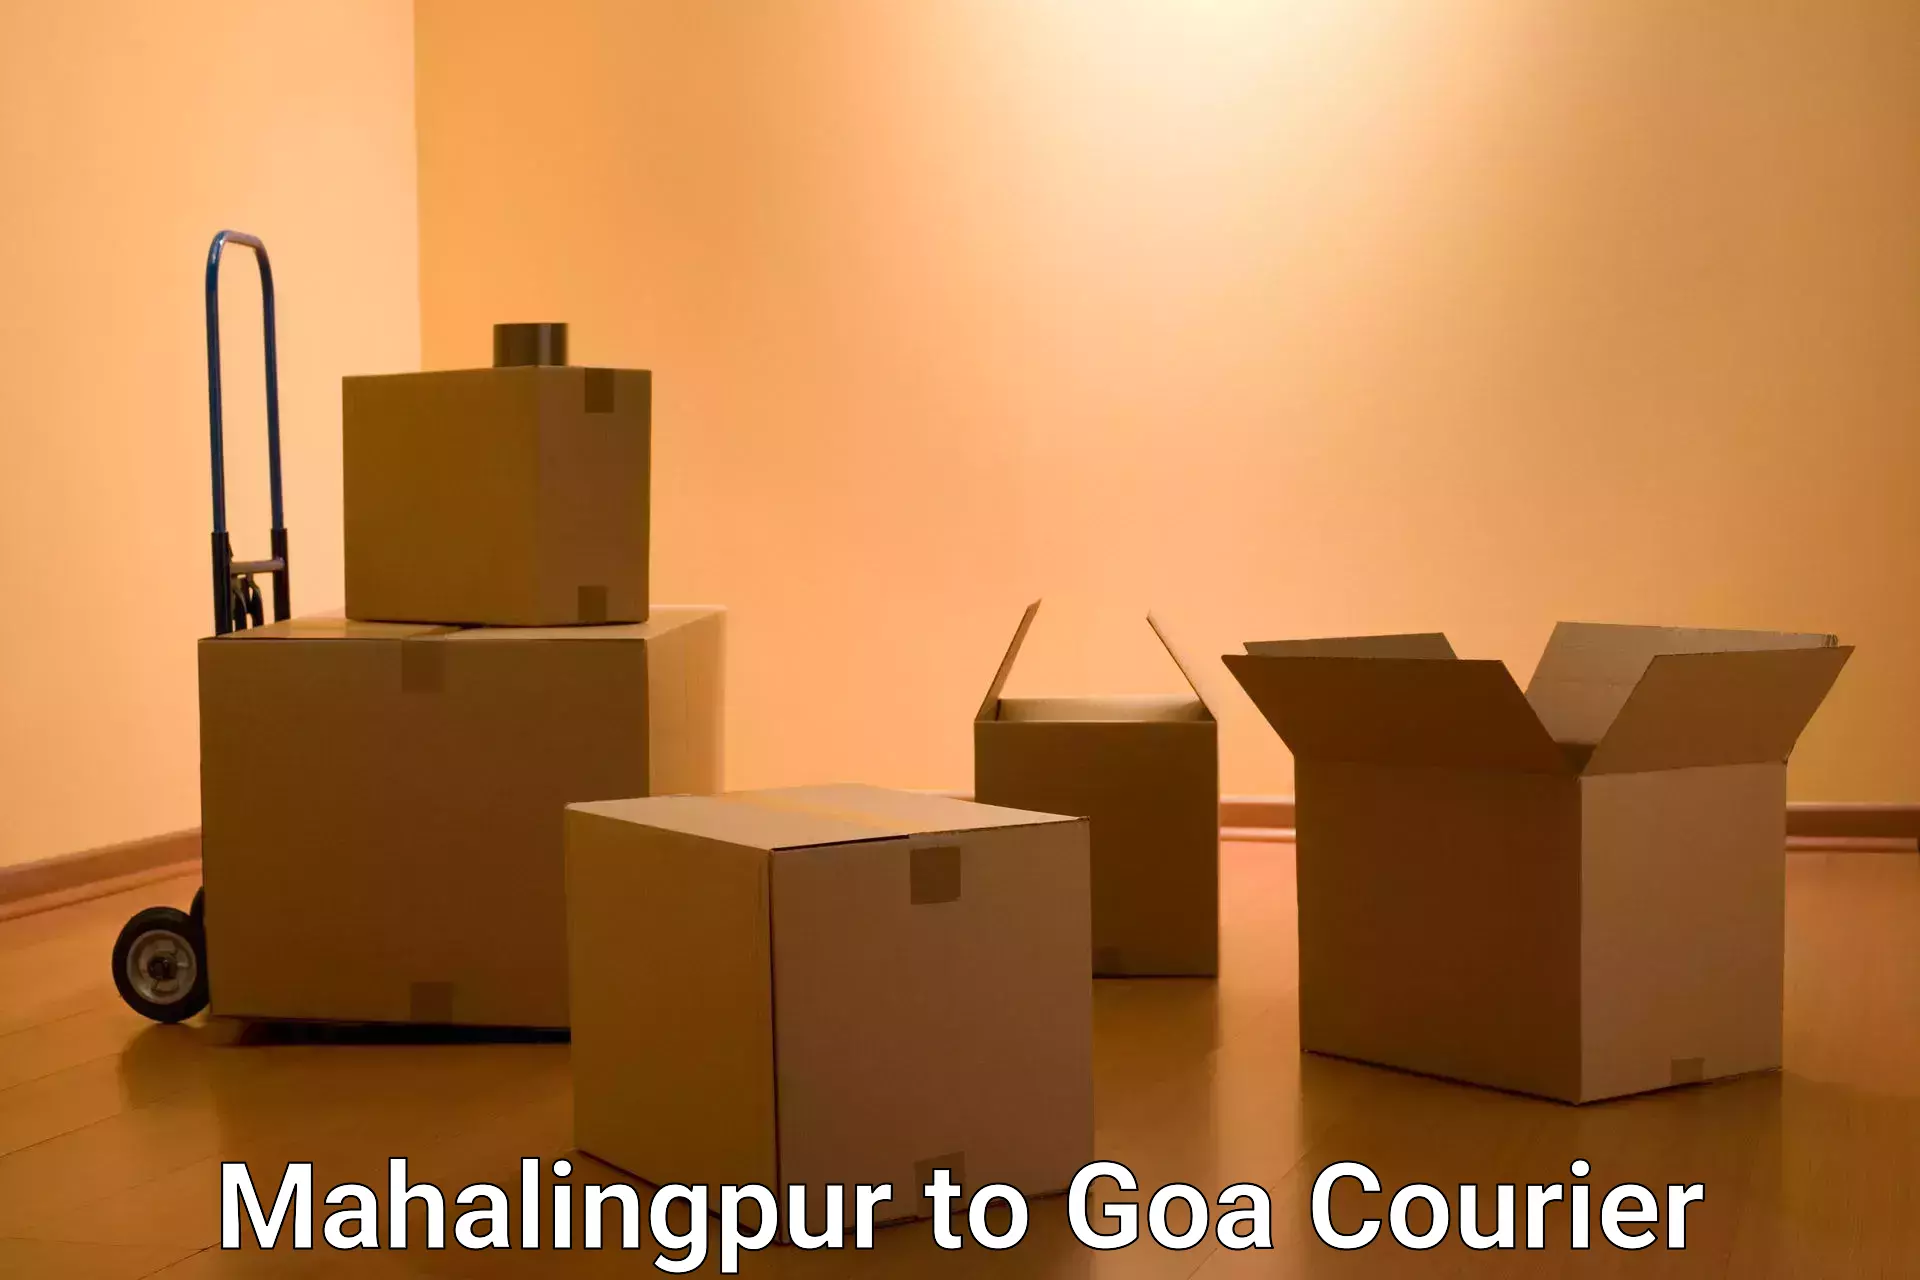 Reliable delivery network Mahalingpur to Goa University